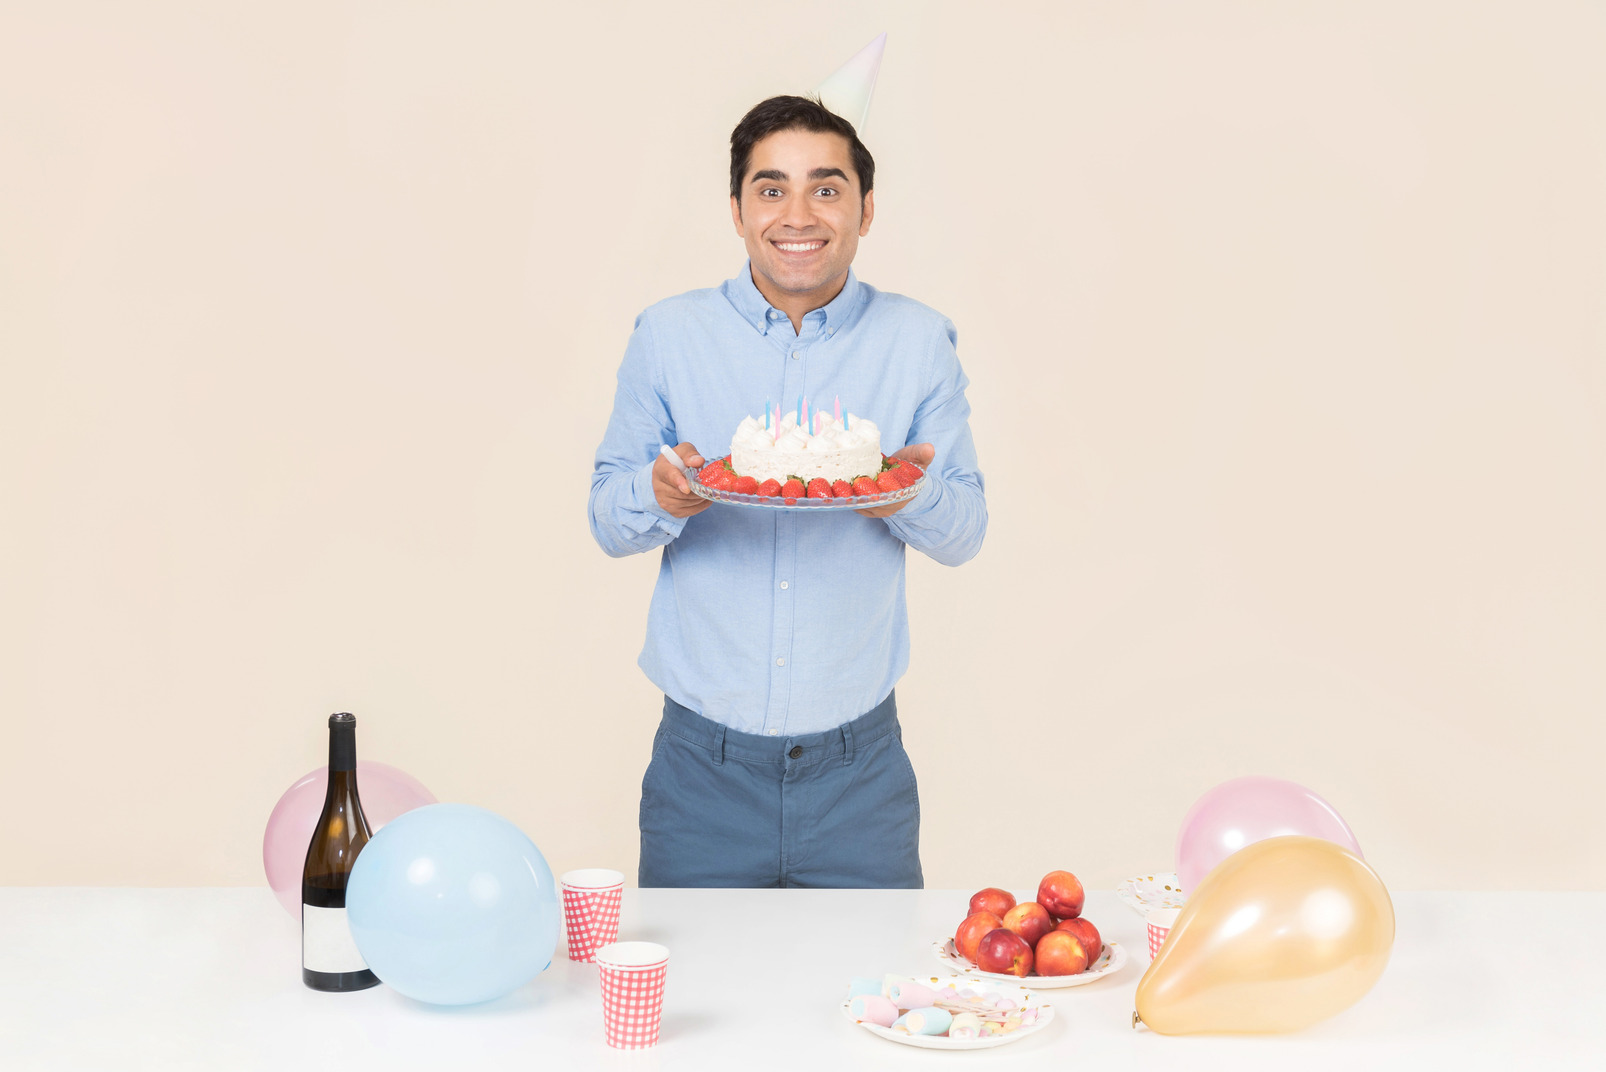 Young man standing at the birthday table and holding cake